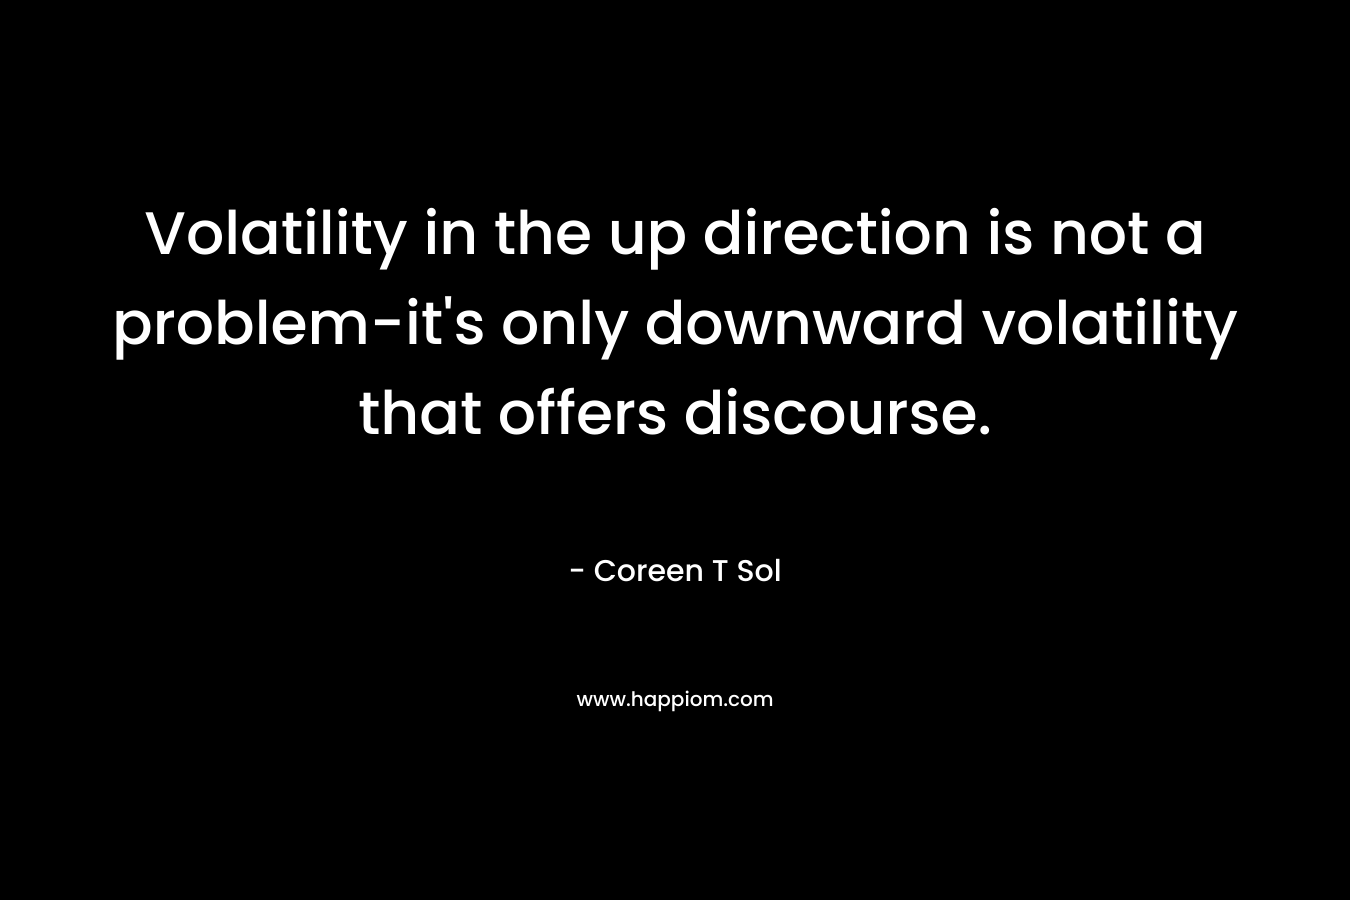 Volatility in the up direction is not a problem-it’s only downward volatility that offers discourse. – Coreen T Sol